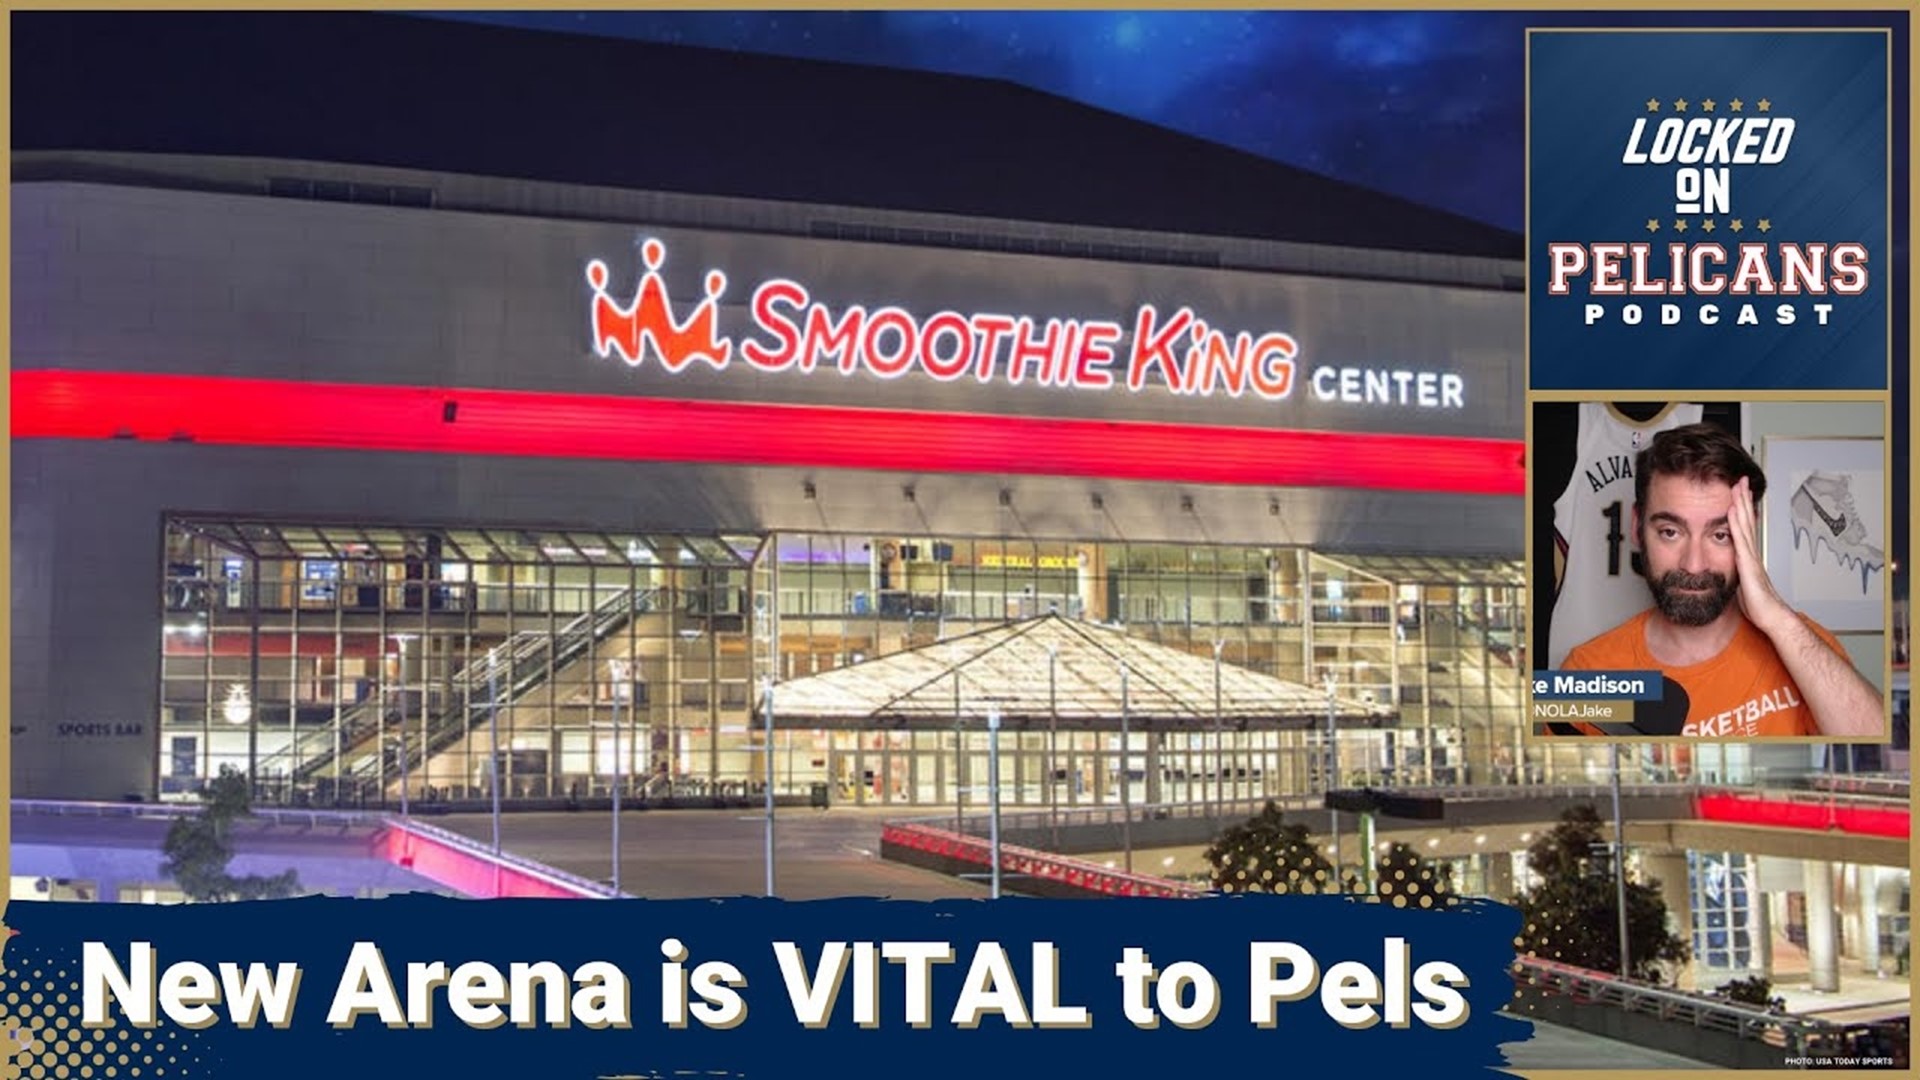 If you want the Pelicans to stay in New Orleans then you better hope they get a new arena sooner rather than later.